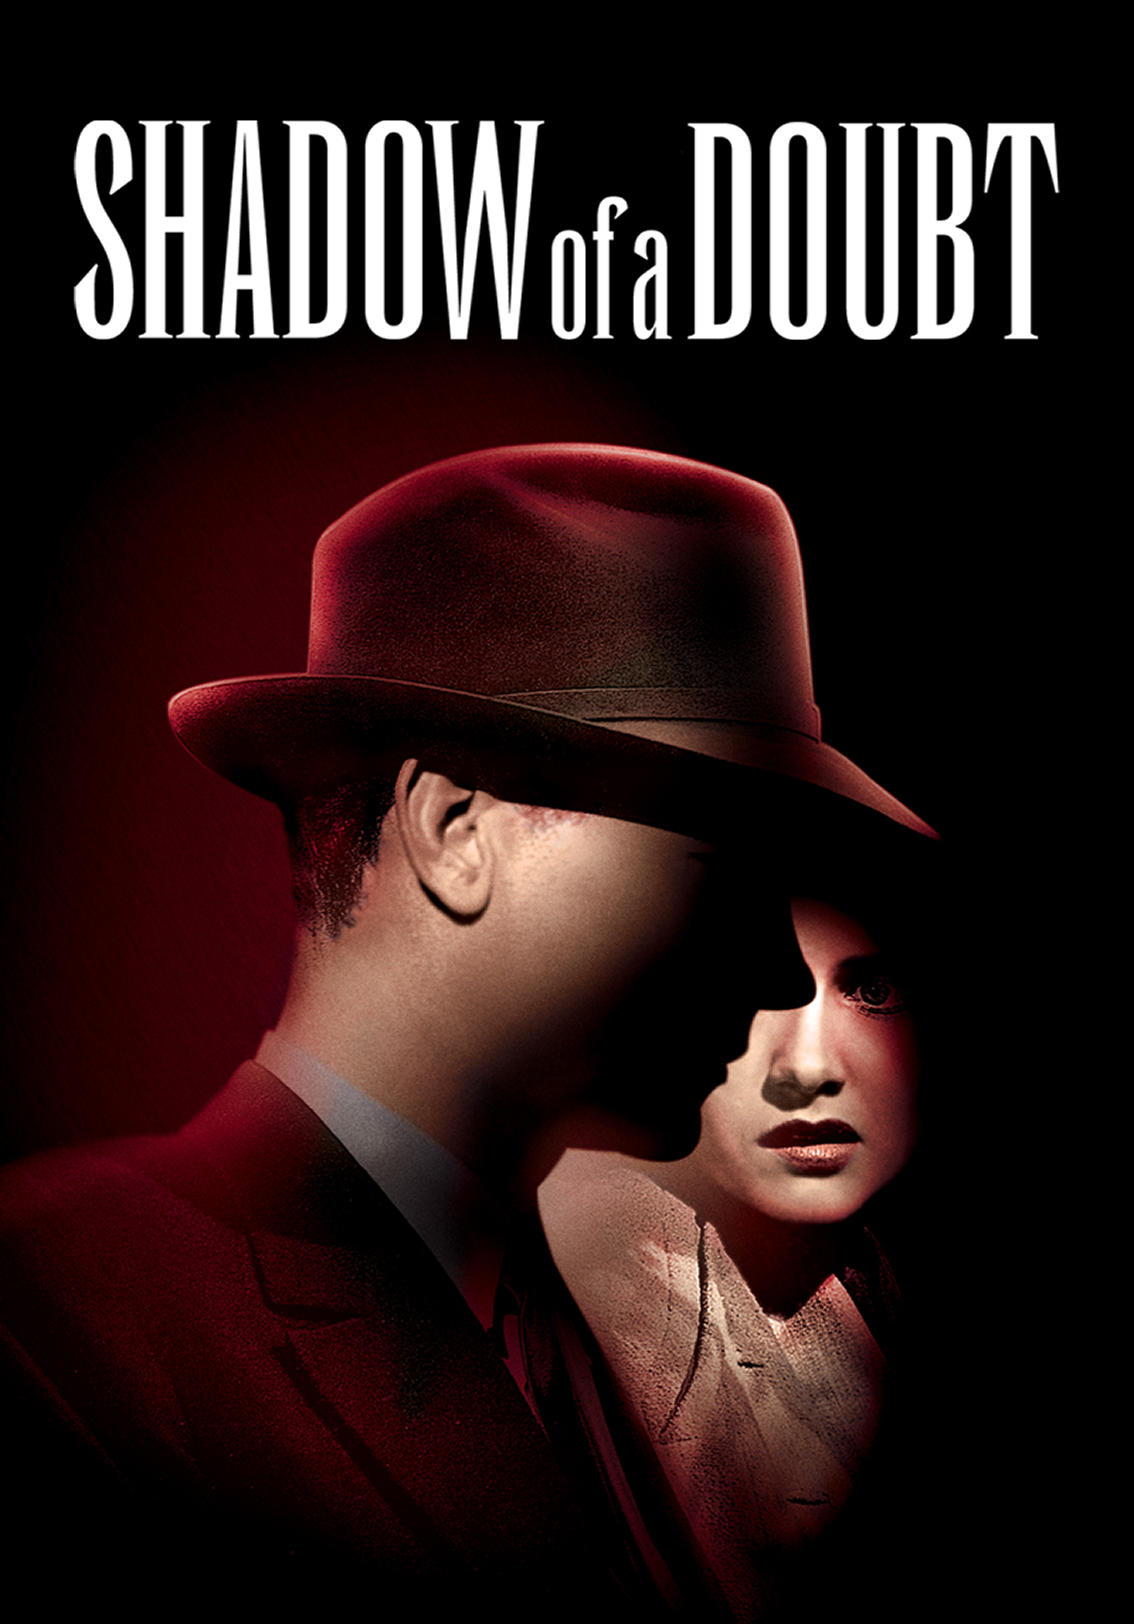 movie shadow of doubt